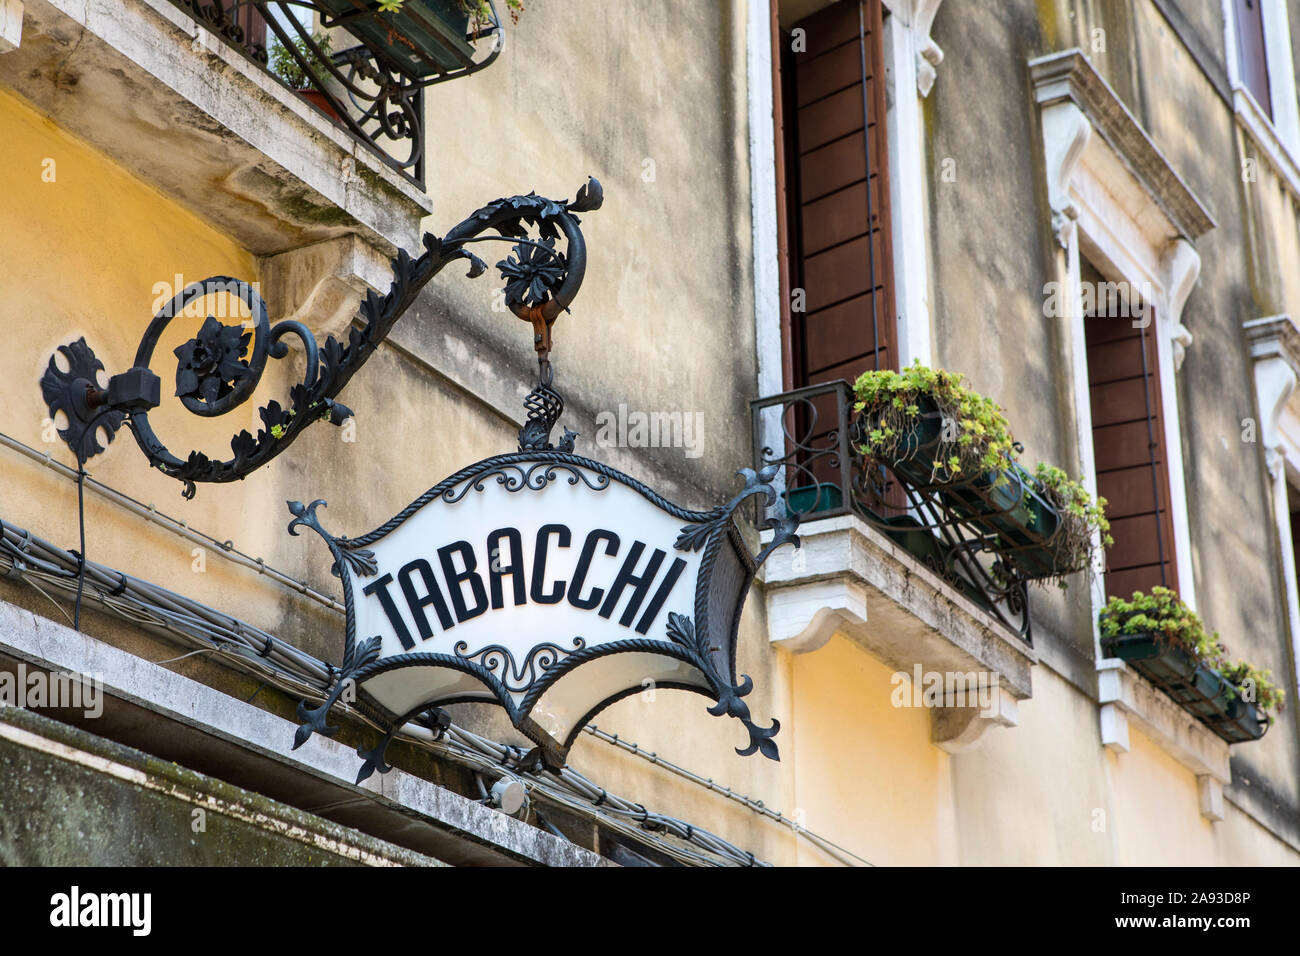 An old-fashioned Tabacchi, or Tobacco, sign above a shop in Venice, Italy. Stock Photo